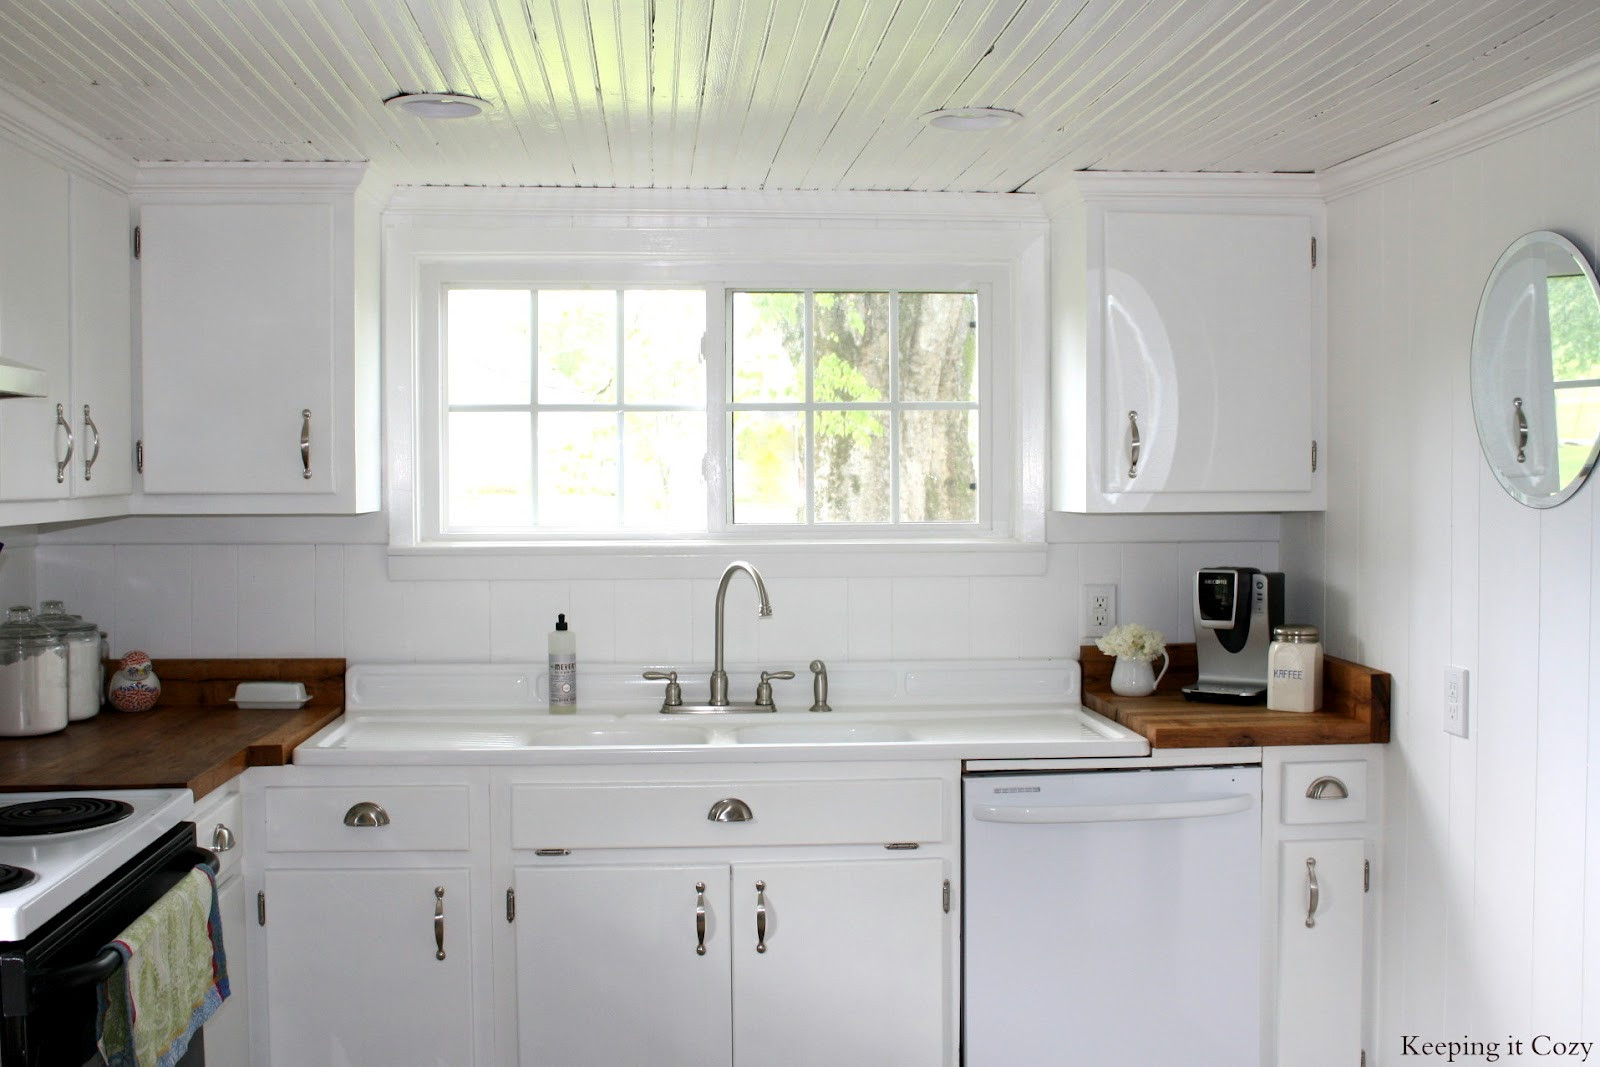 White Country Kitchen Cabinets
 WhisperWood Cottage 20 White Cottage Kitchens Features